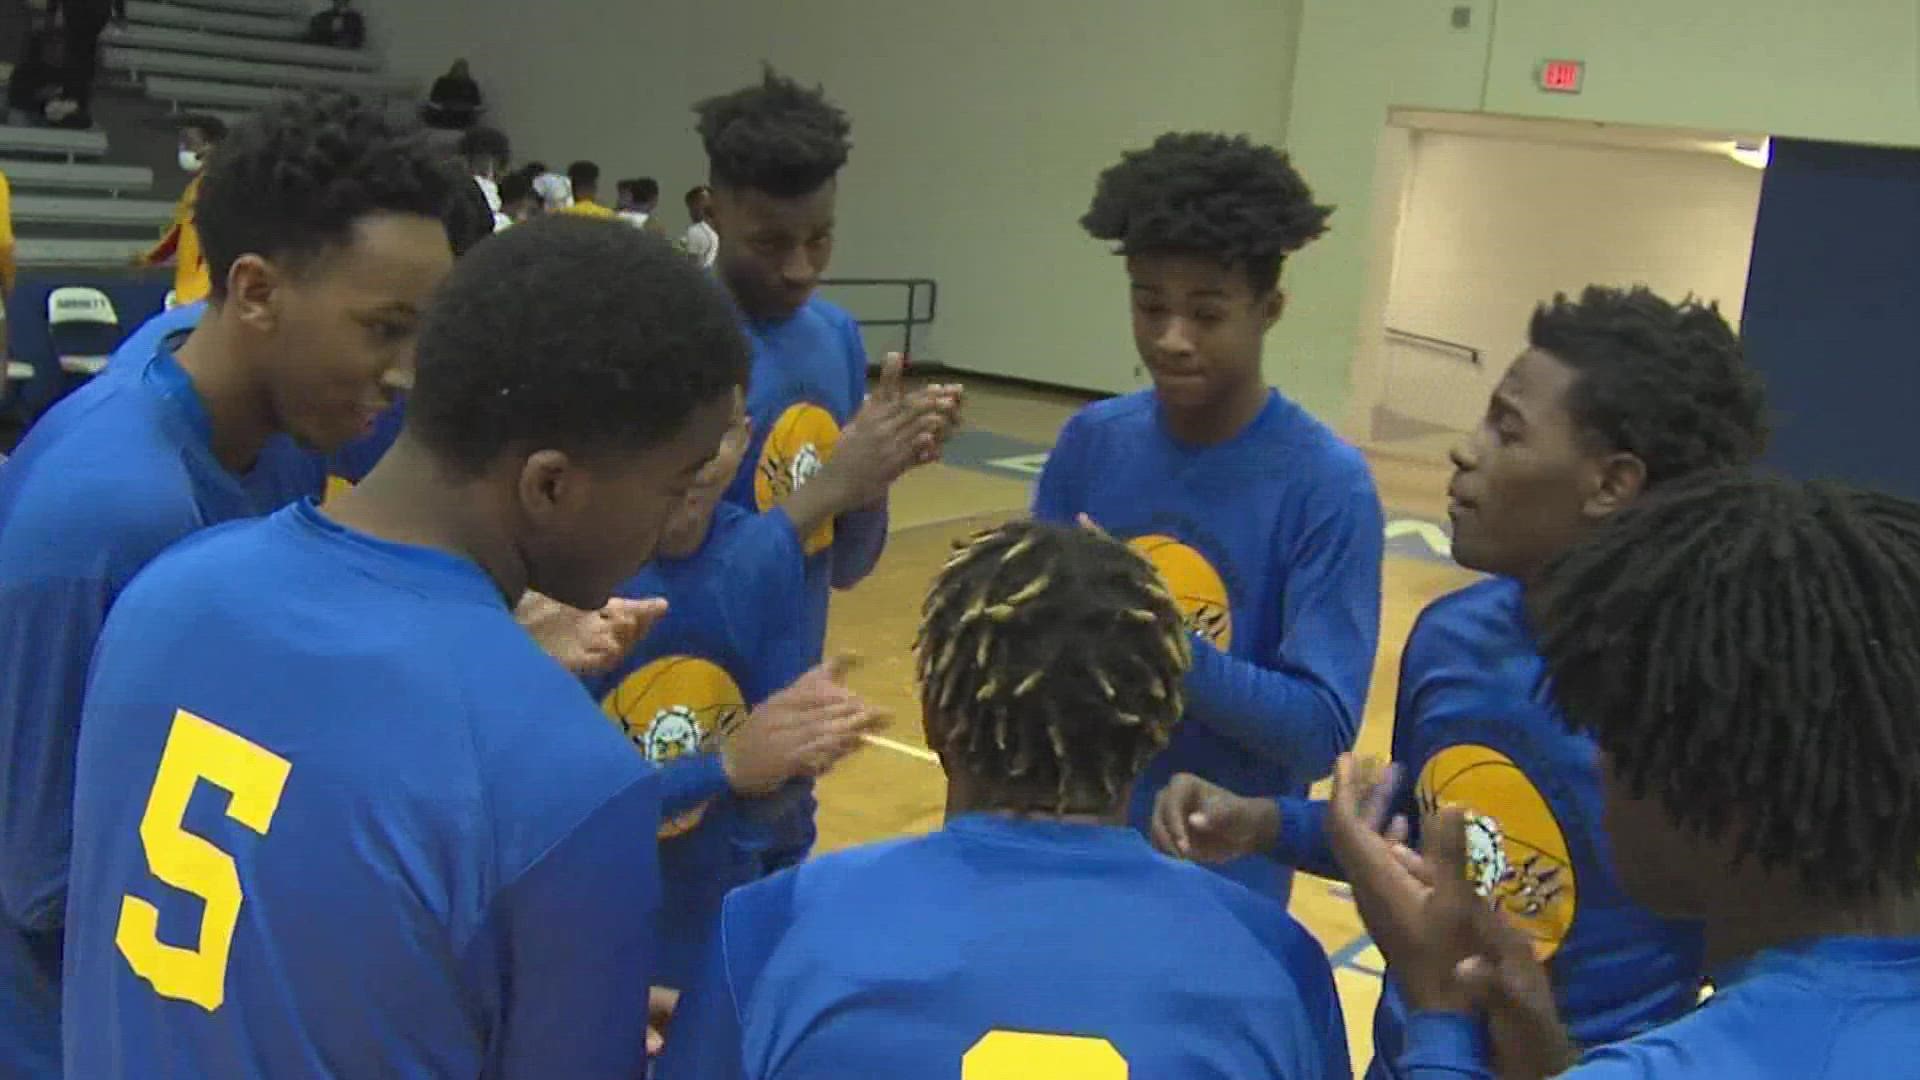 Booker T. Washington High School has been around since 1893. They've played a lot of basketball in that time, but 129 years later, they may have their best team yet.